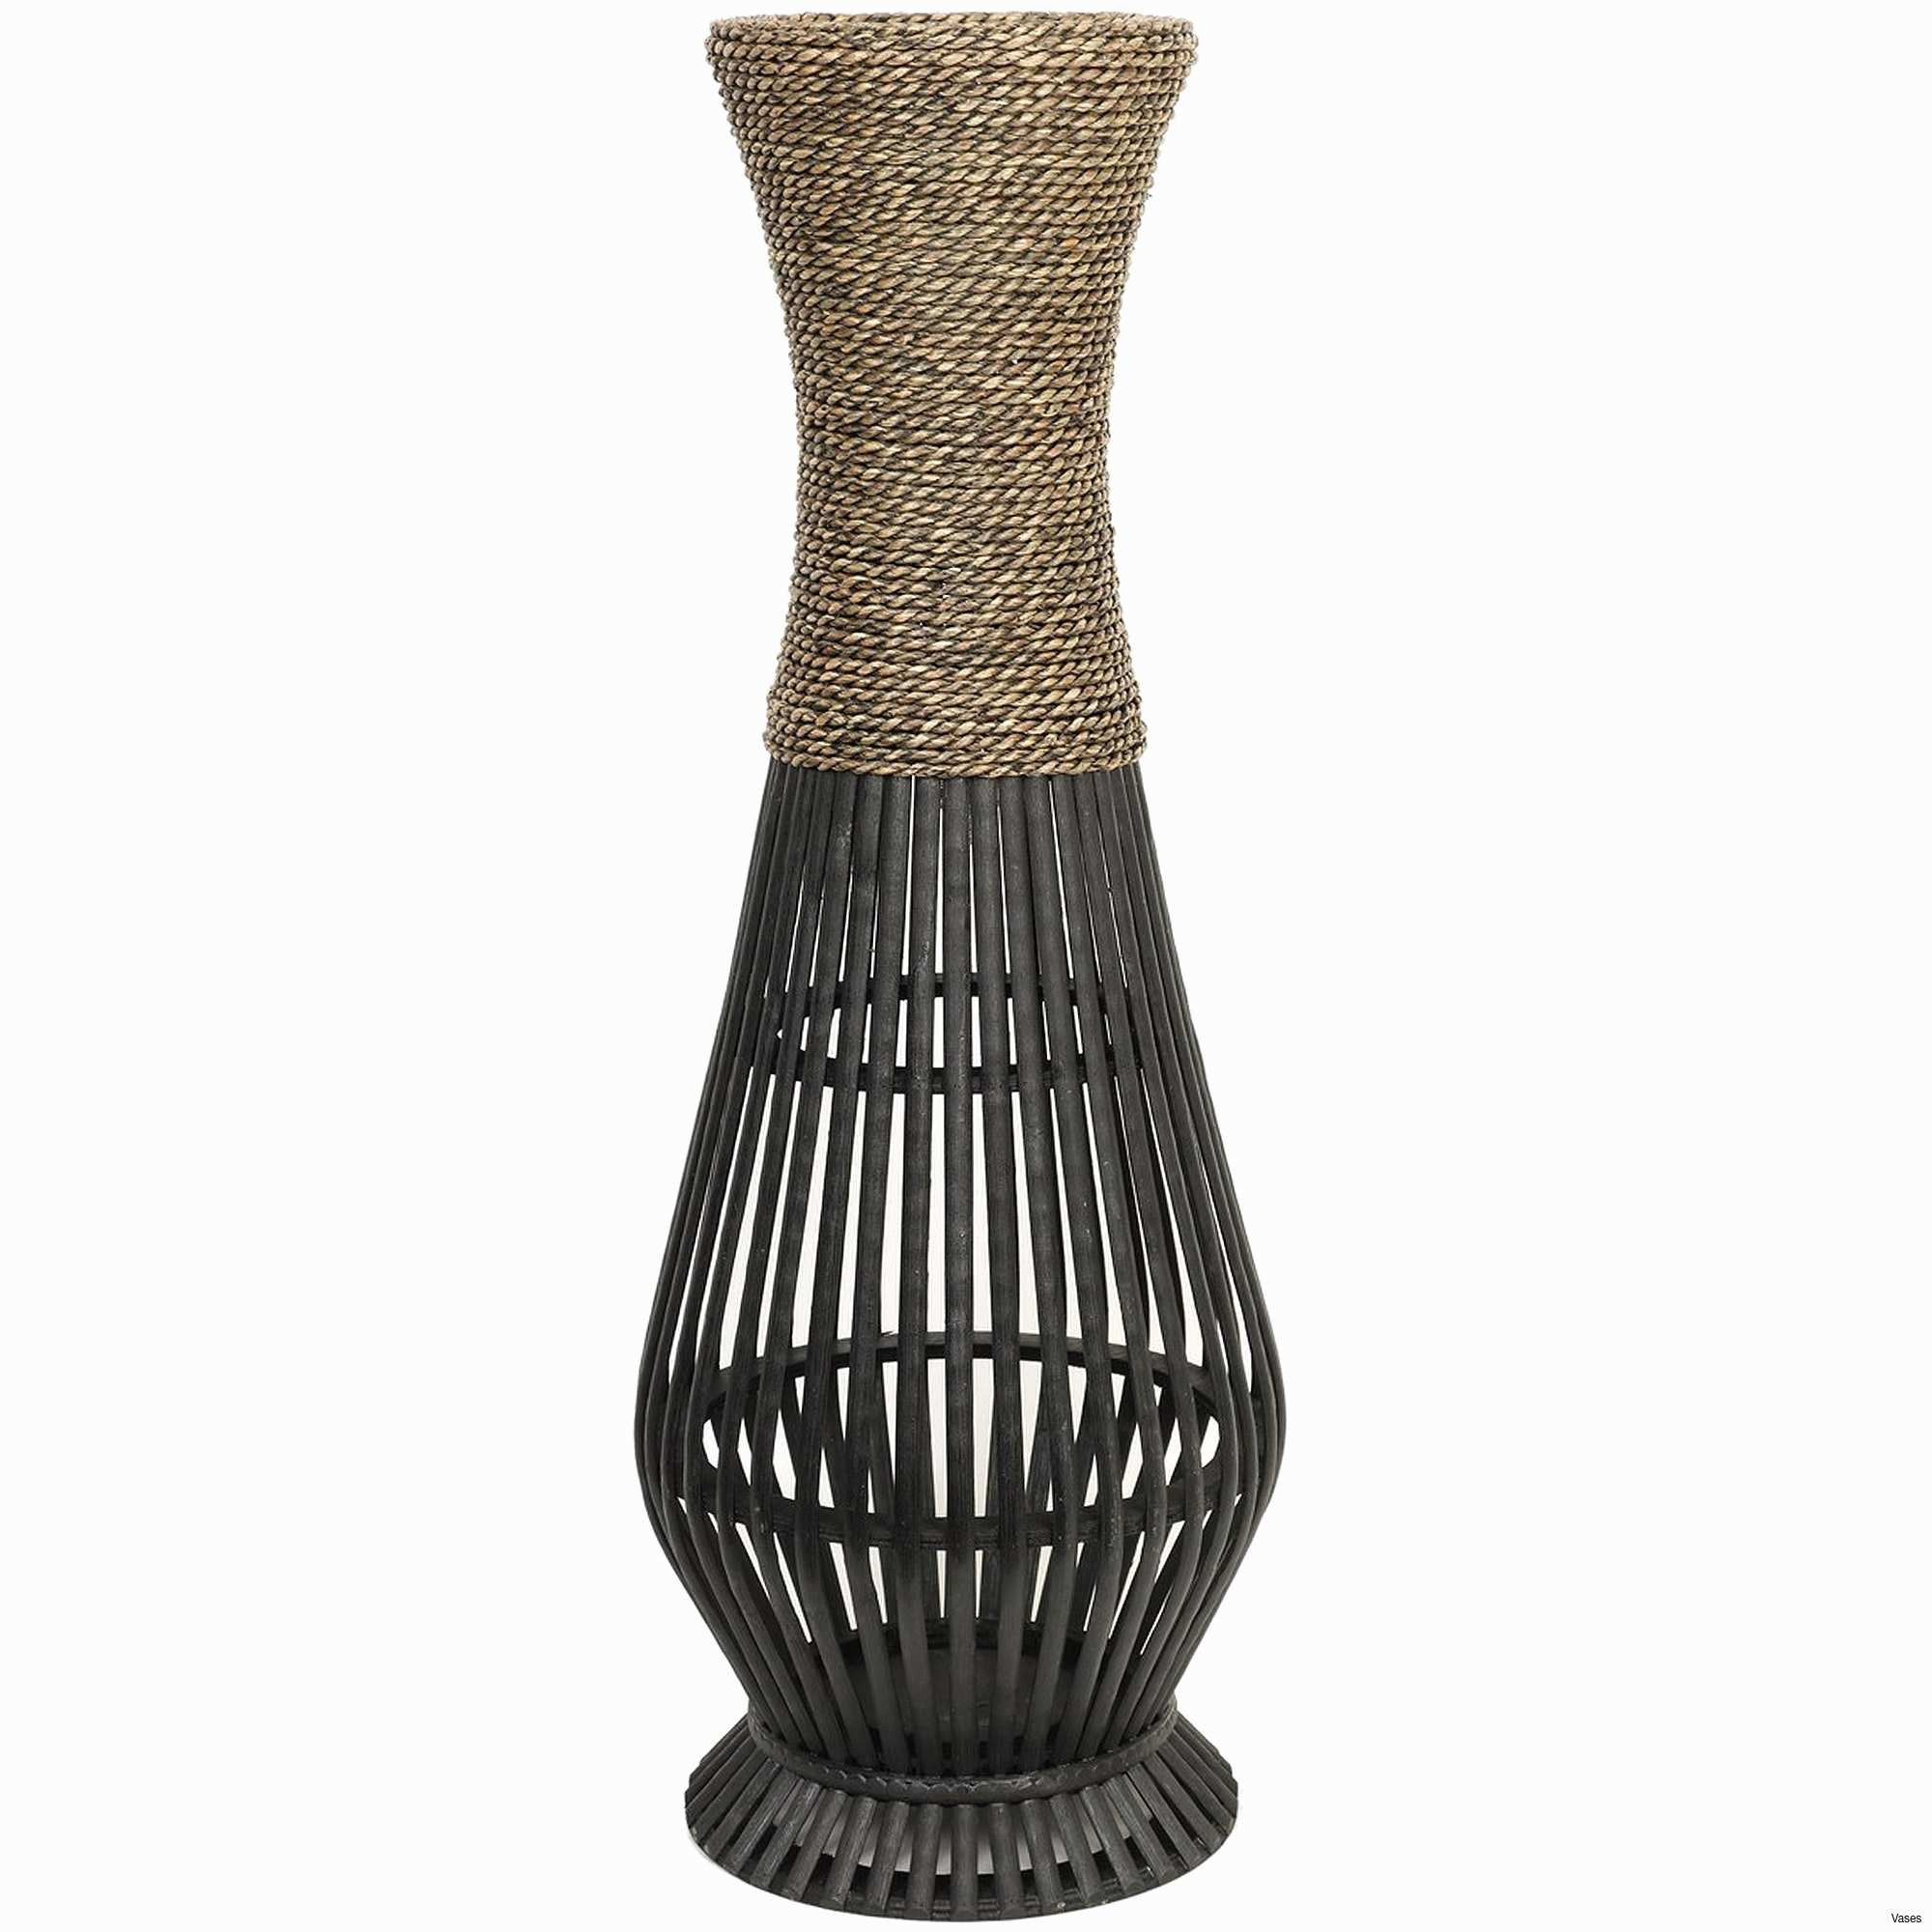 17 Elegant Waterford Crystal Vase 14 Inch 2024 free download waterford crystal vase 14 inch of tall wood floor vase stock tall floor vase 36 inches wood silver with regard to tall wood floor vase collection wooden home decor lovely d dkbrw 5743 1h vas